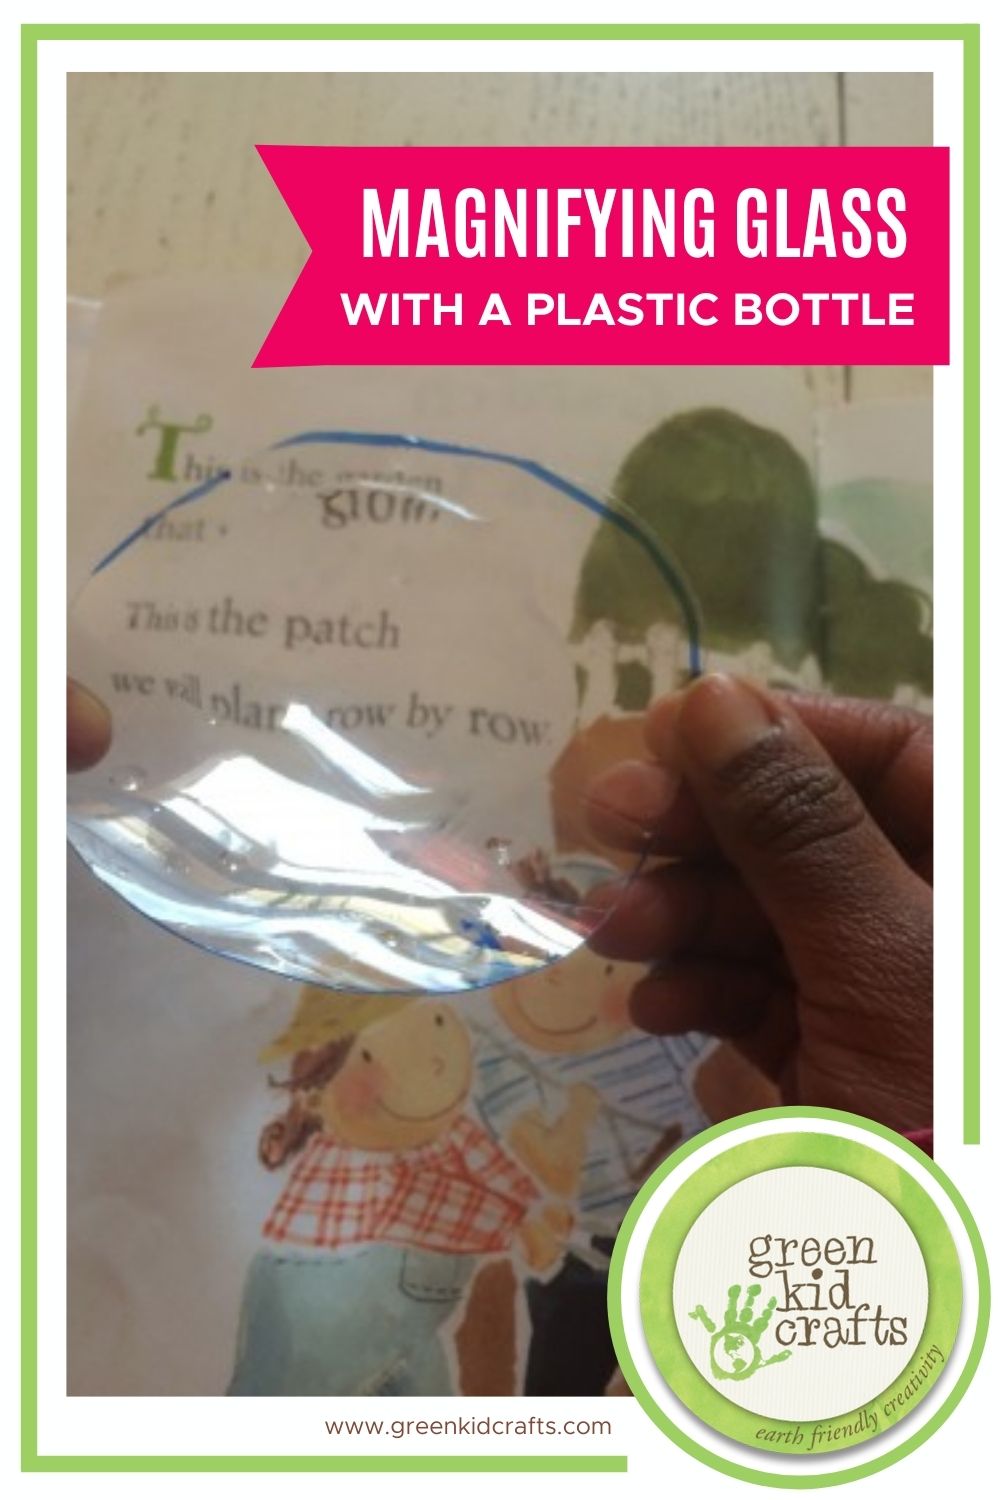 How To Make A Magnifying Glass With A Plastic Bottle – Green Kid Crafts